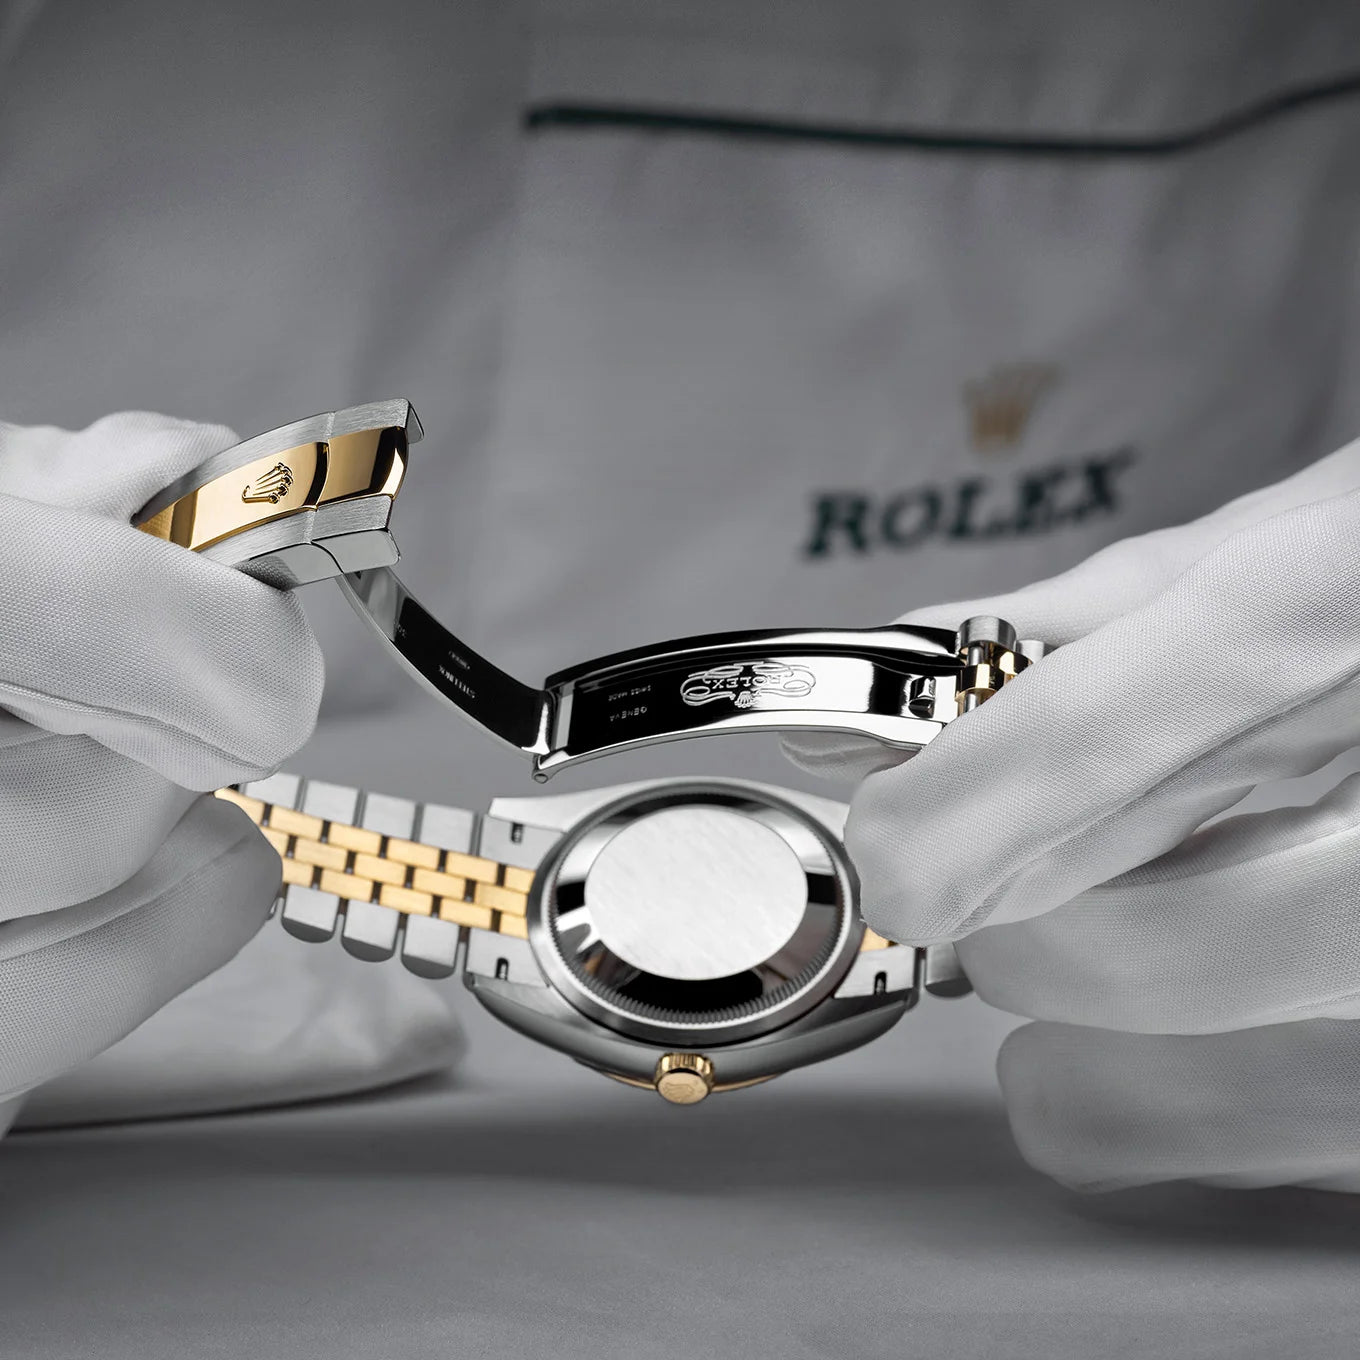 Rolex watches at SHREVE & CO.